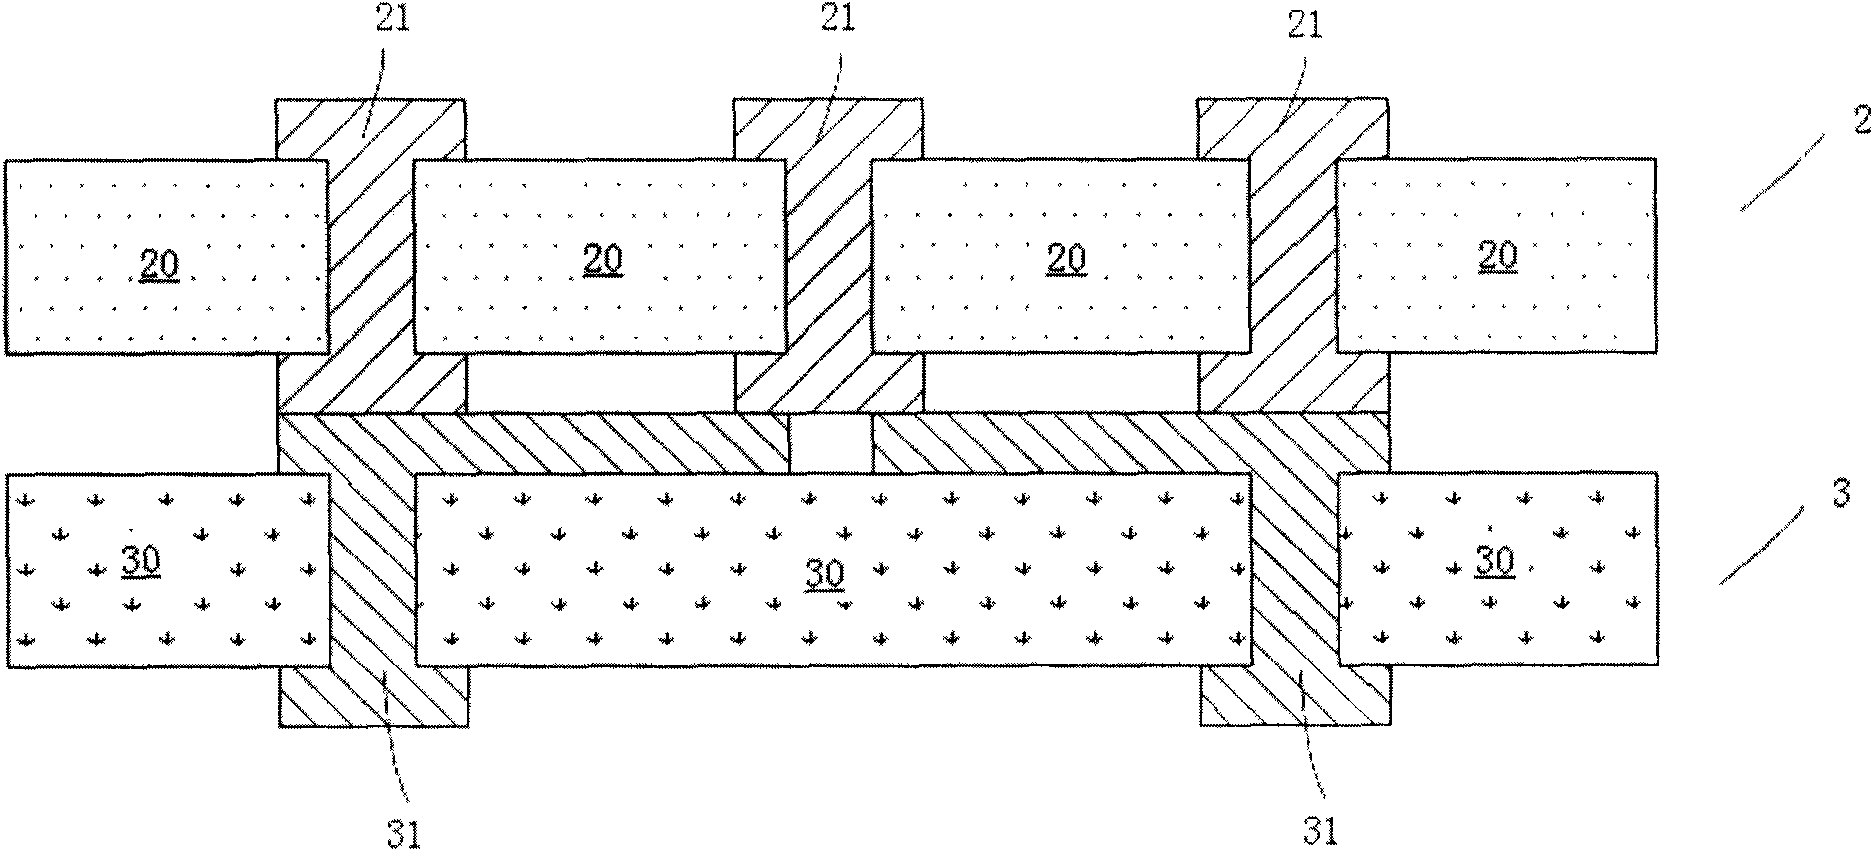 Silicon slice alignment method for silicon through hole interconnection